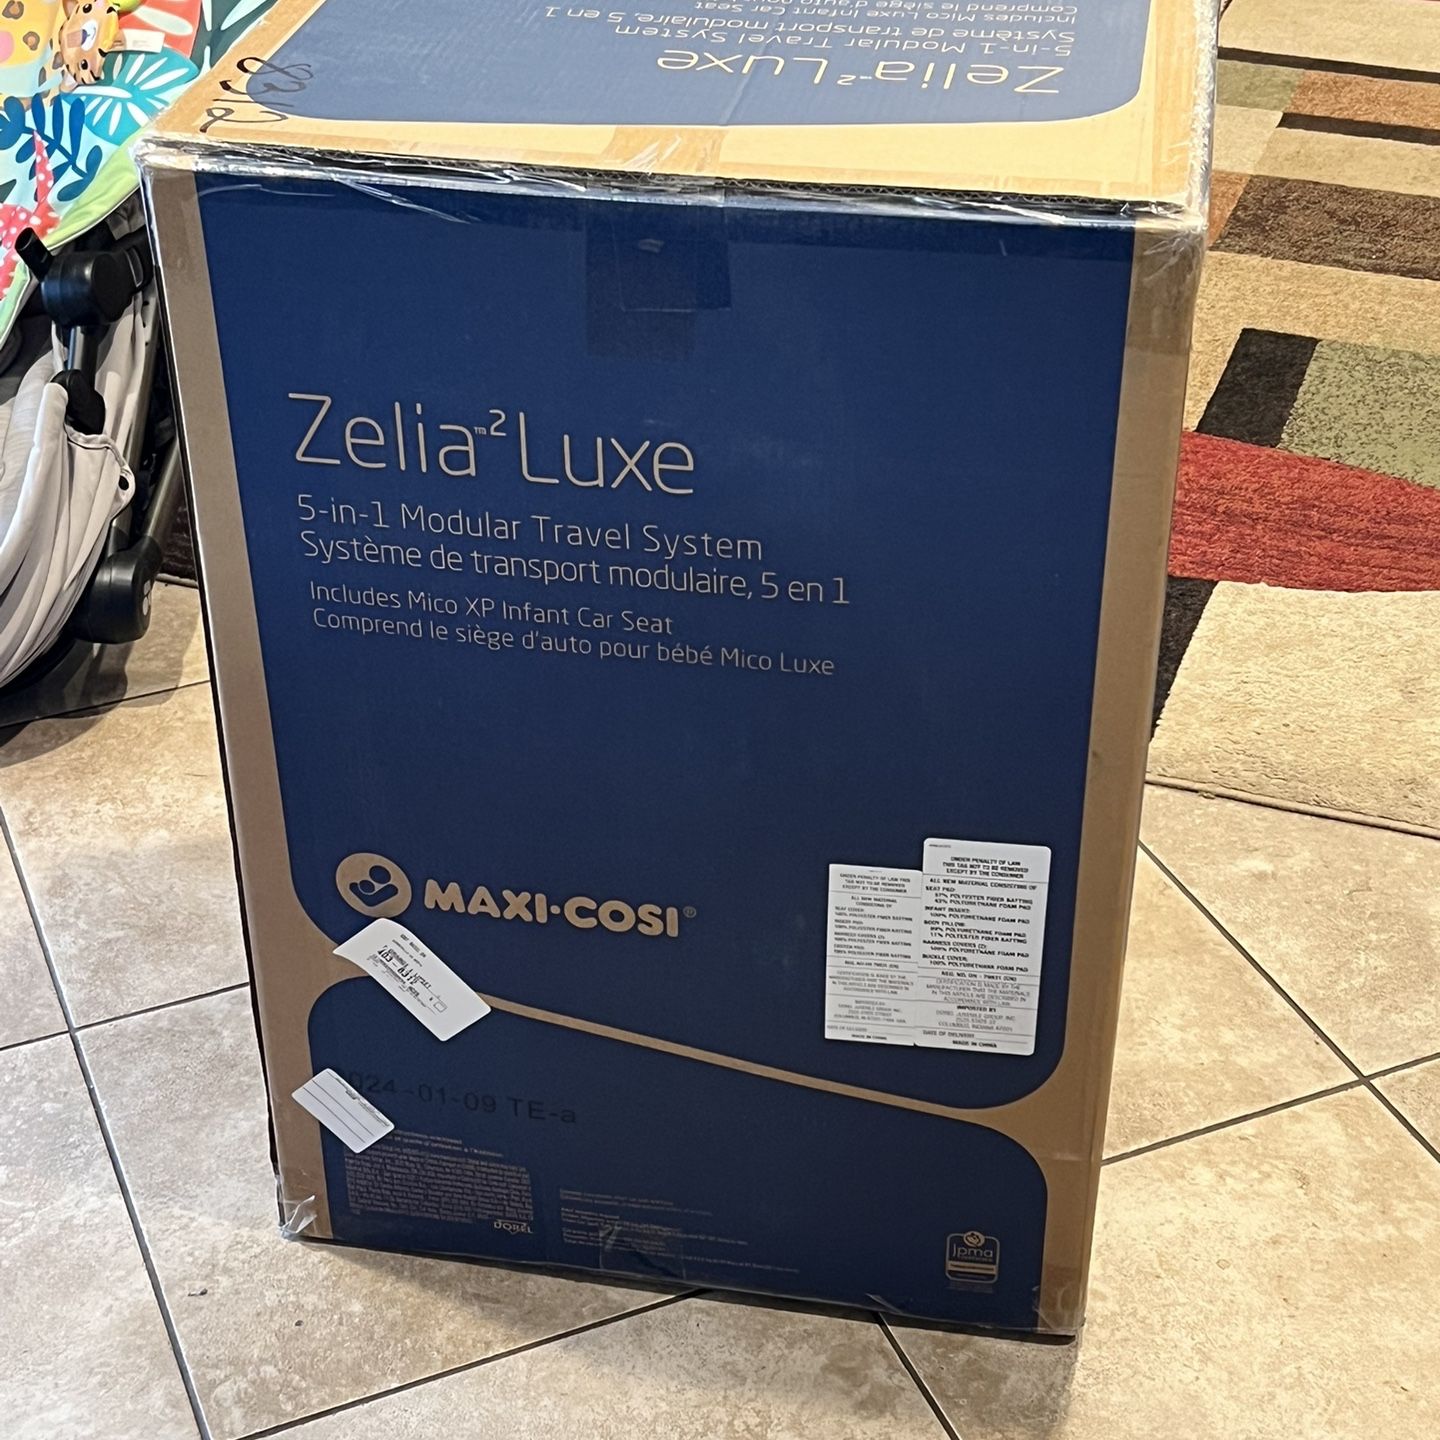 Brand New Maxi Cosí Zelia Luxe Stroller, Bassinet, and Infant Car Seat